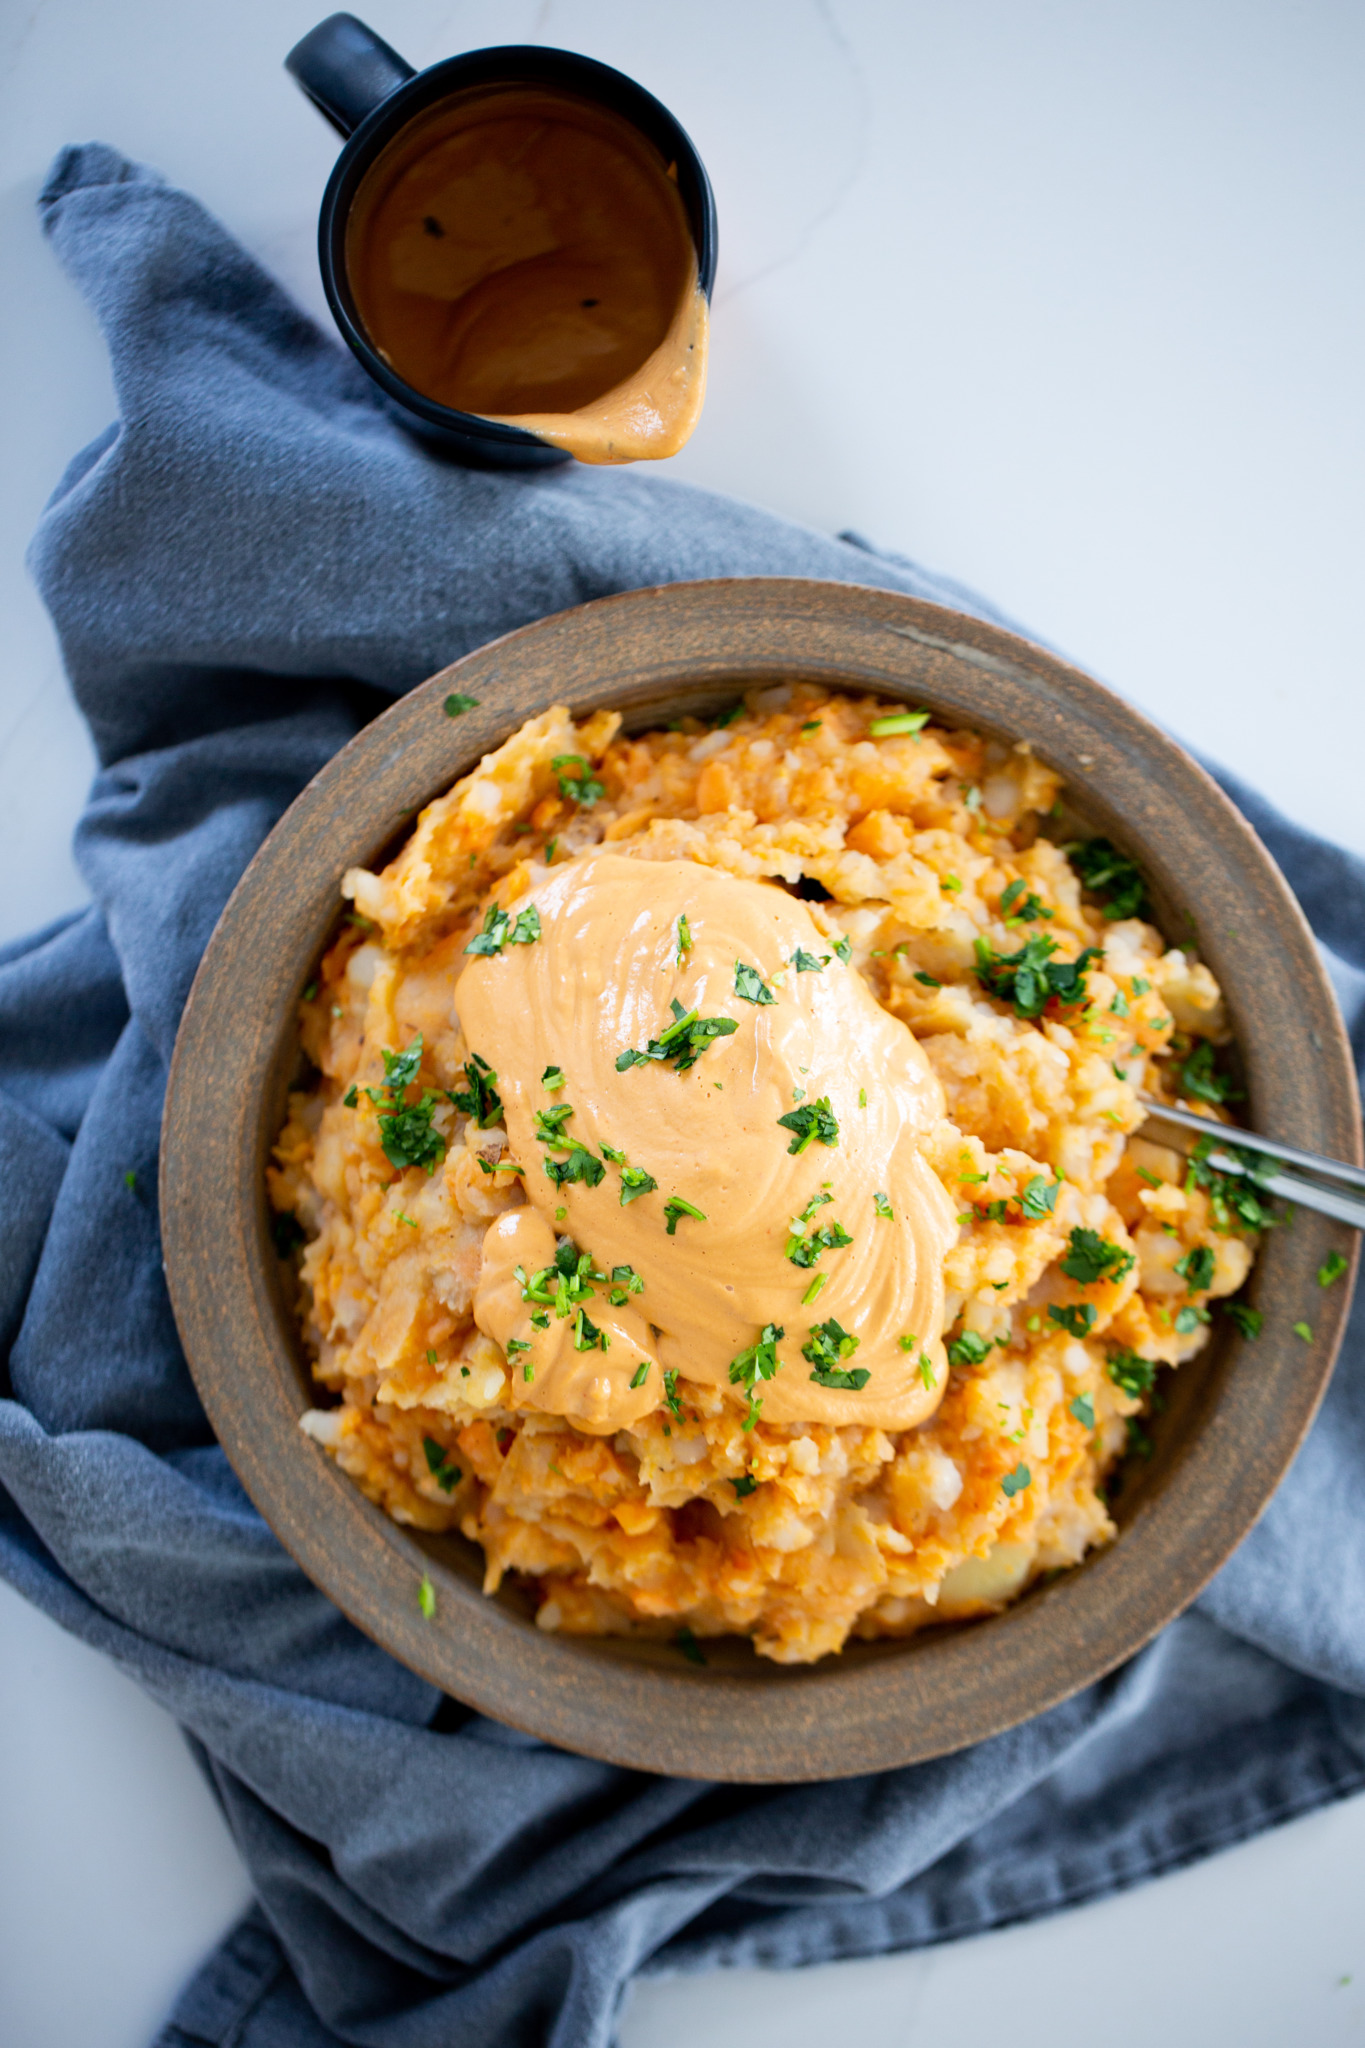 mashed potatoes and sweet potatoes with vegan chipotle queso